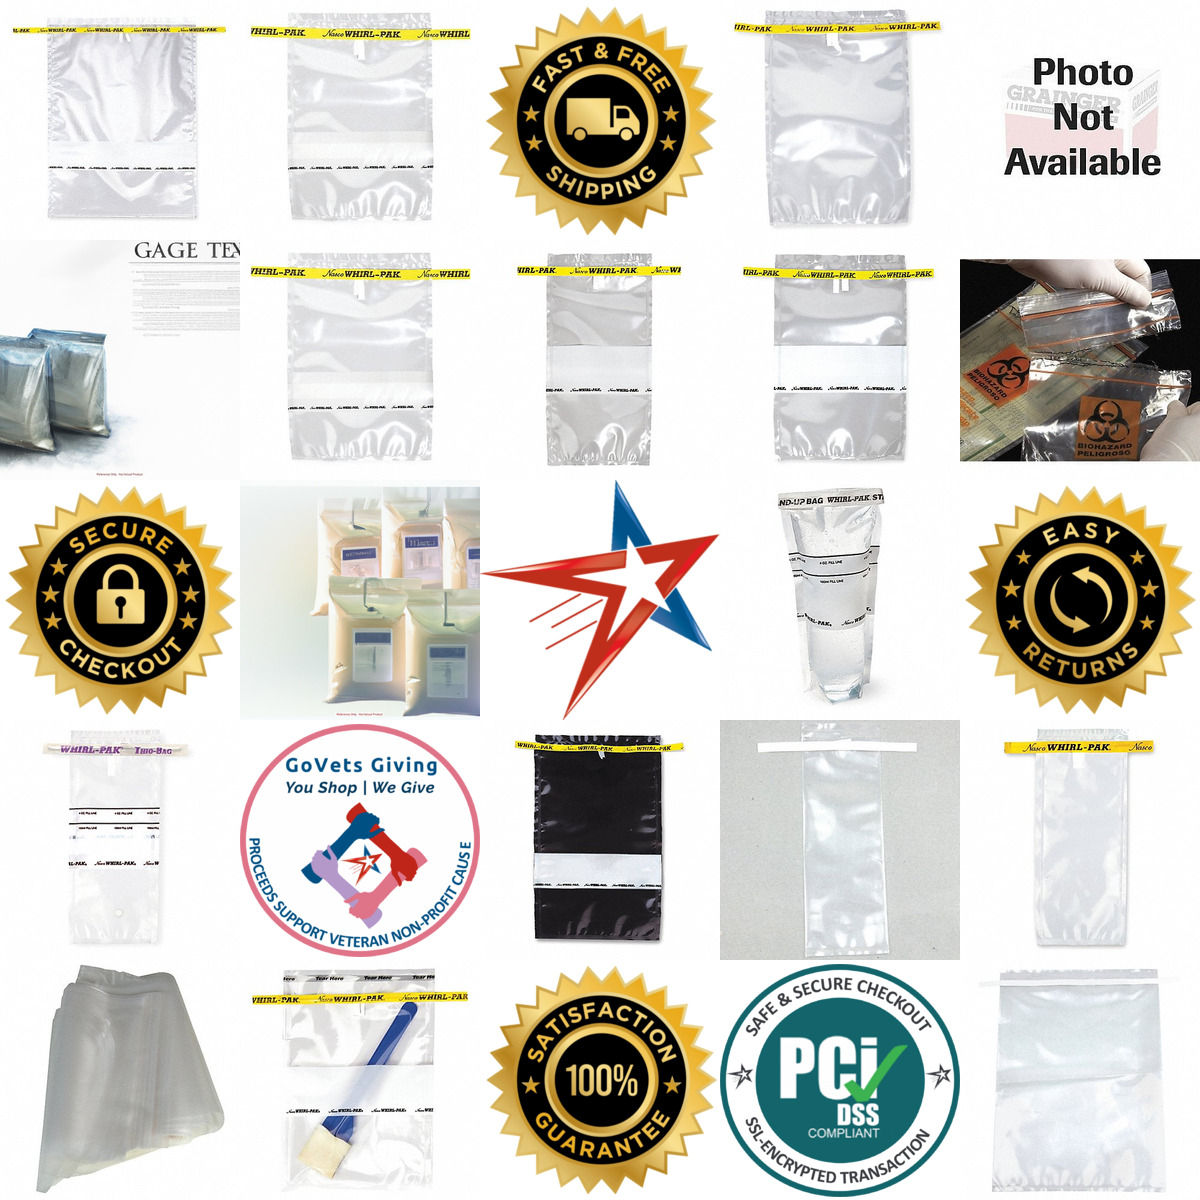 A selection of Sampling Bags products on GoVets